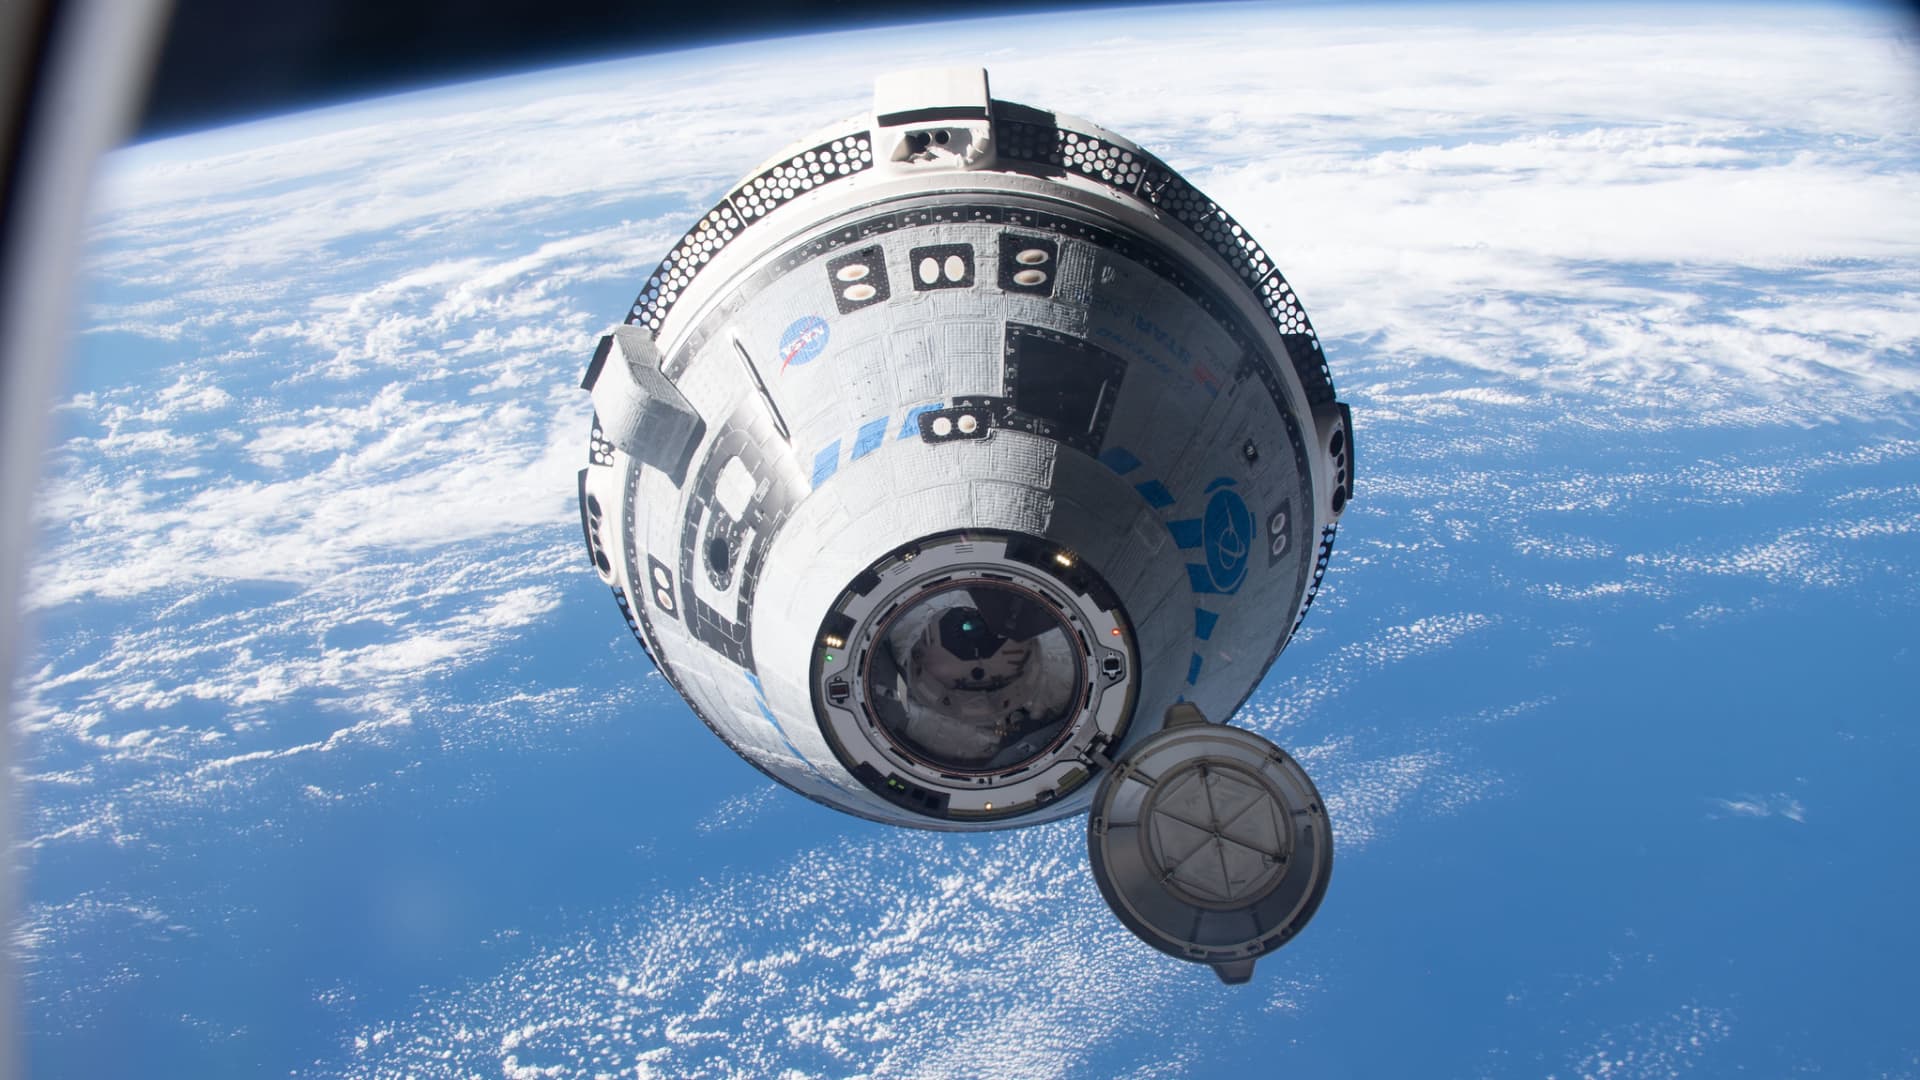 Boeing's Starliner losses total $1.5 billion with NASA astronauts still waiting to fly